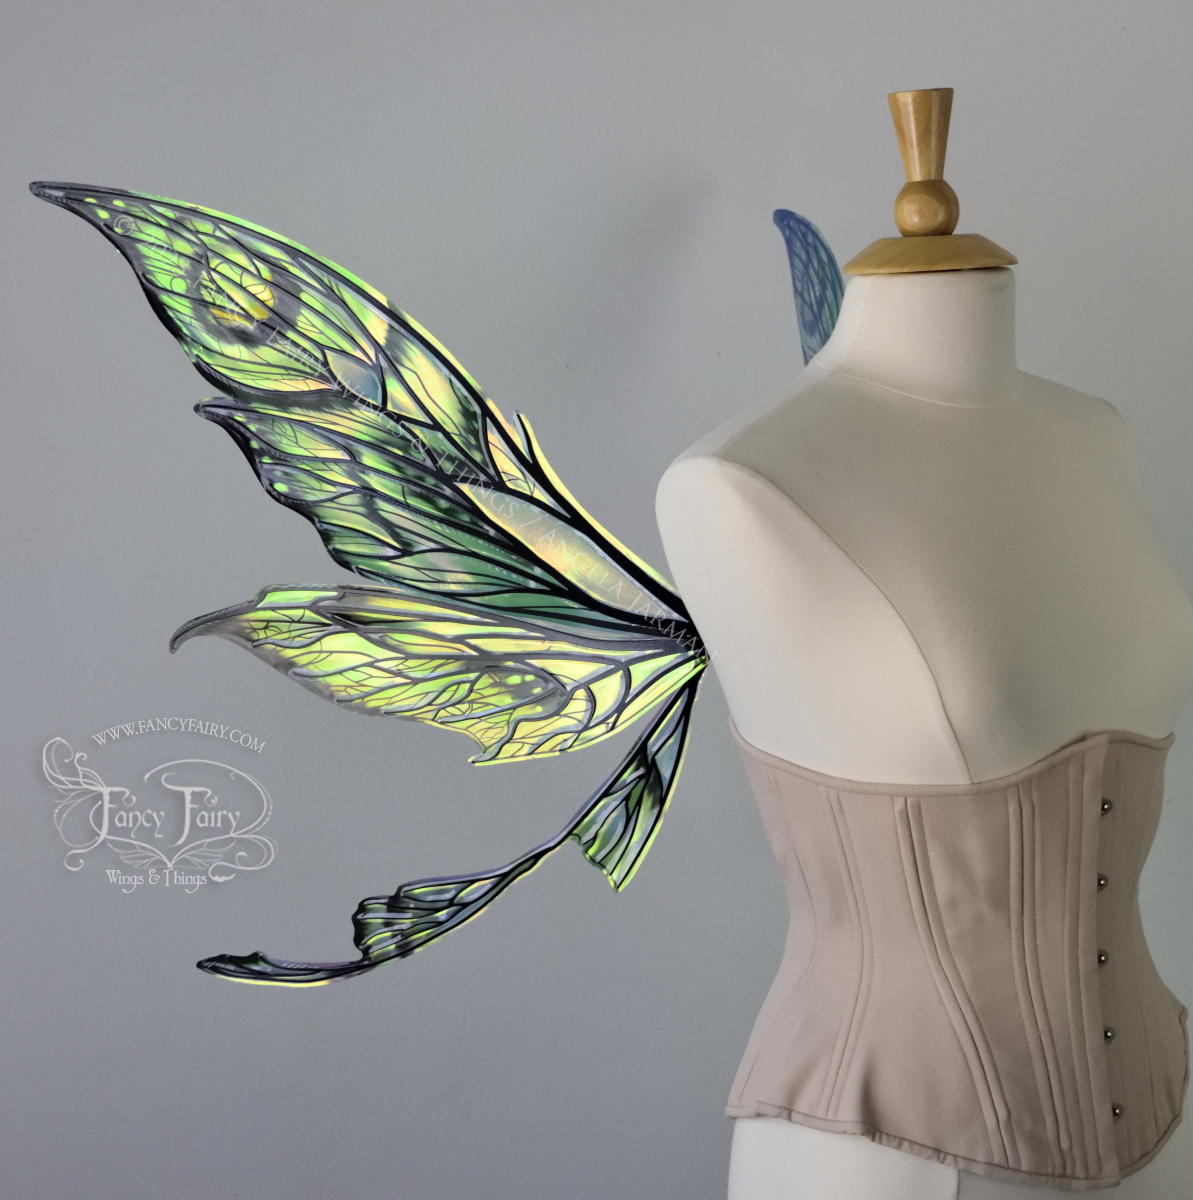 Left side view of large green, gold & black painted iridescent fairy wings with black veins. Upper panels are elongated with pointed tips, a ‘tail’, lots of vein detail